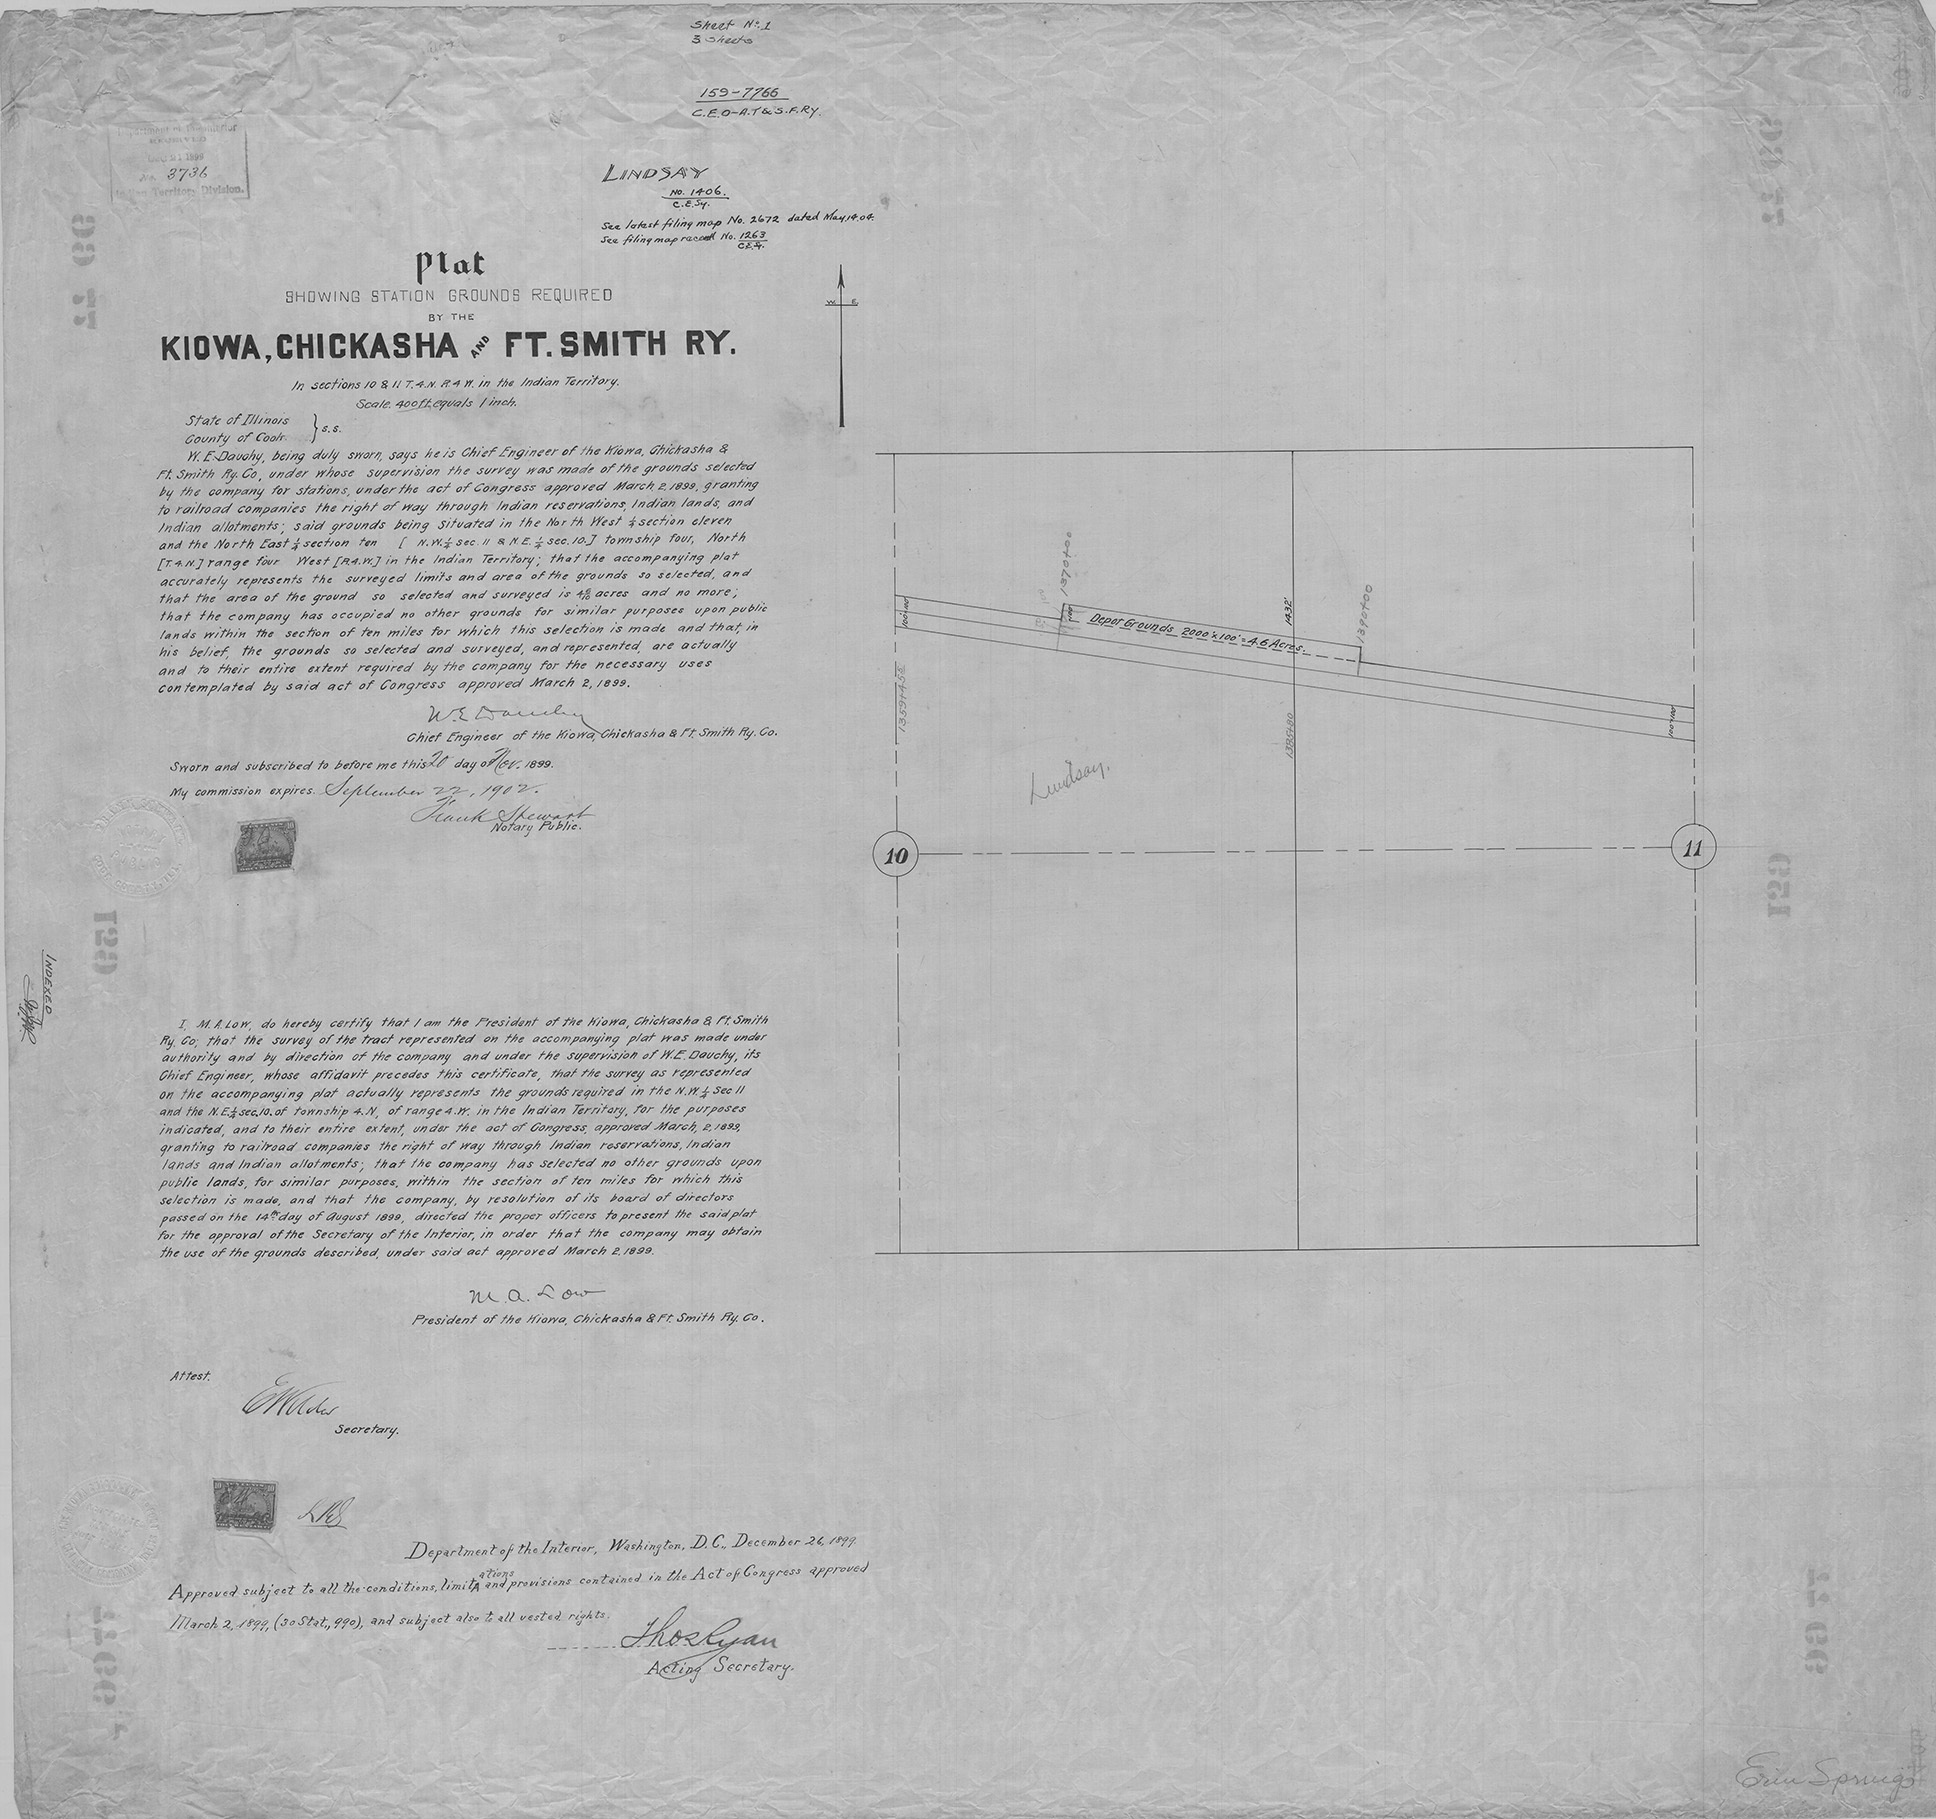 A filing map showing land claimed under an act of Congress in March 1899 and the plat for a train station in Cook County, Ill. A plat map shows the divisions of a piece of land by streets and blocks.